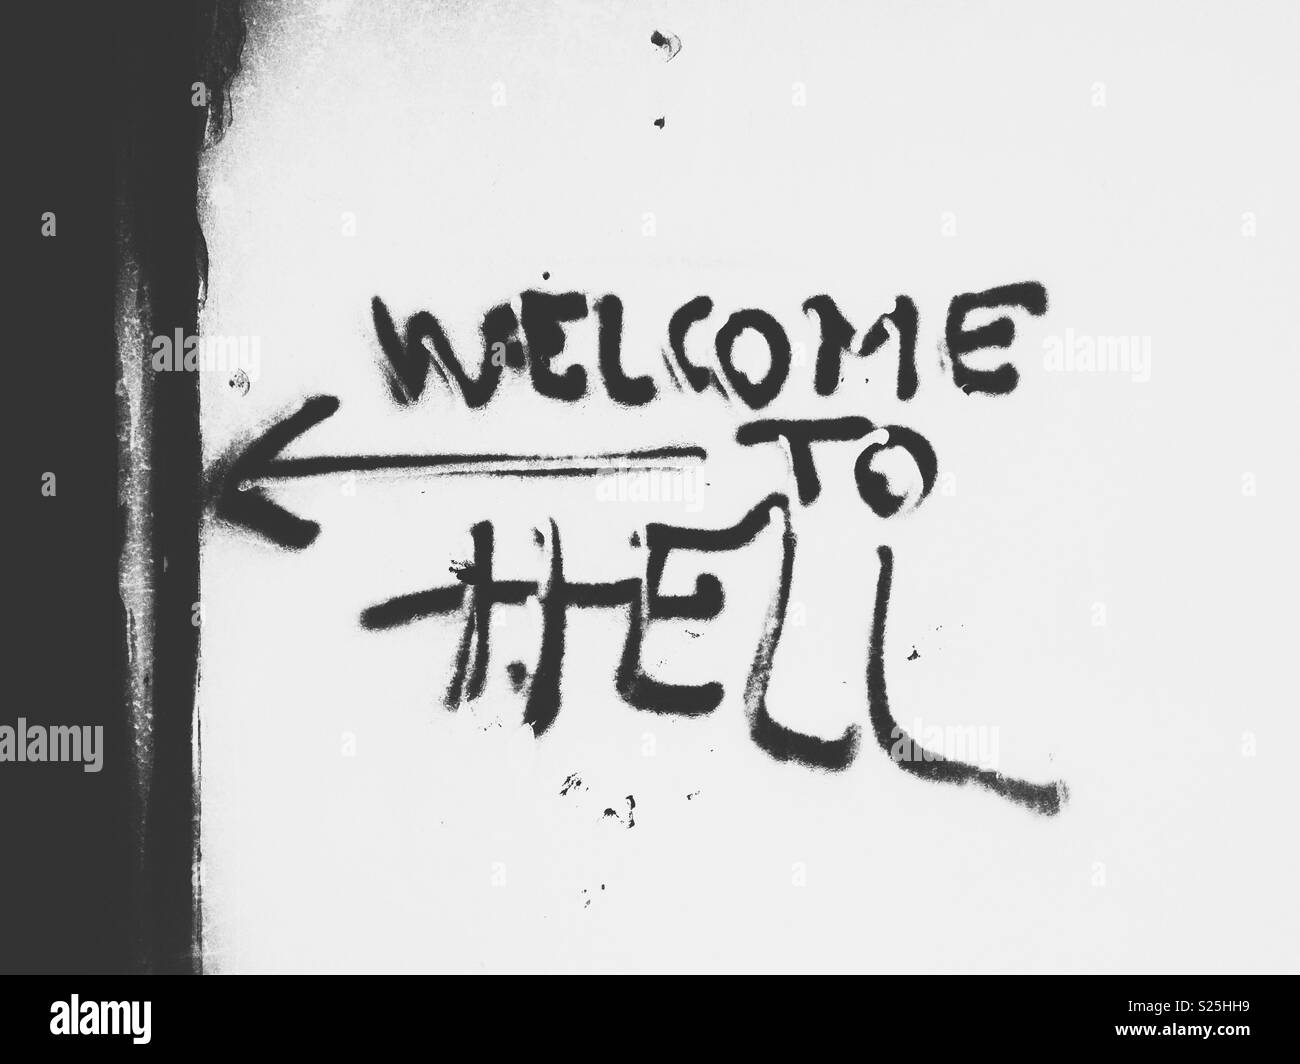 Welcome To Hell Graffiti Stock Photo Alamy